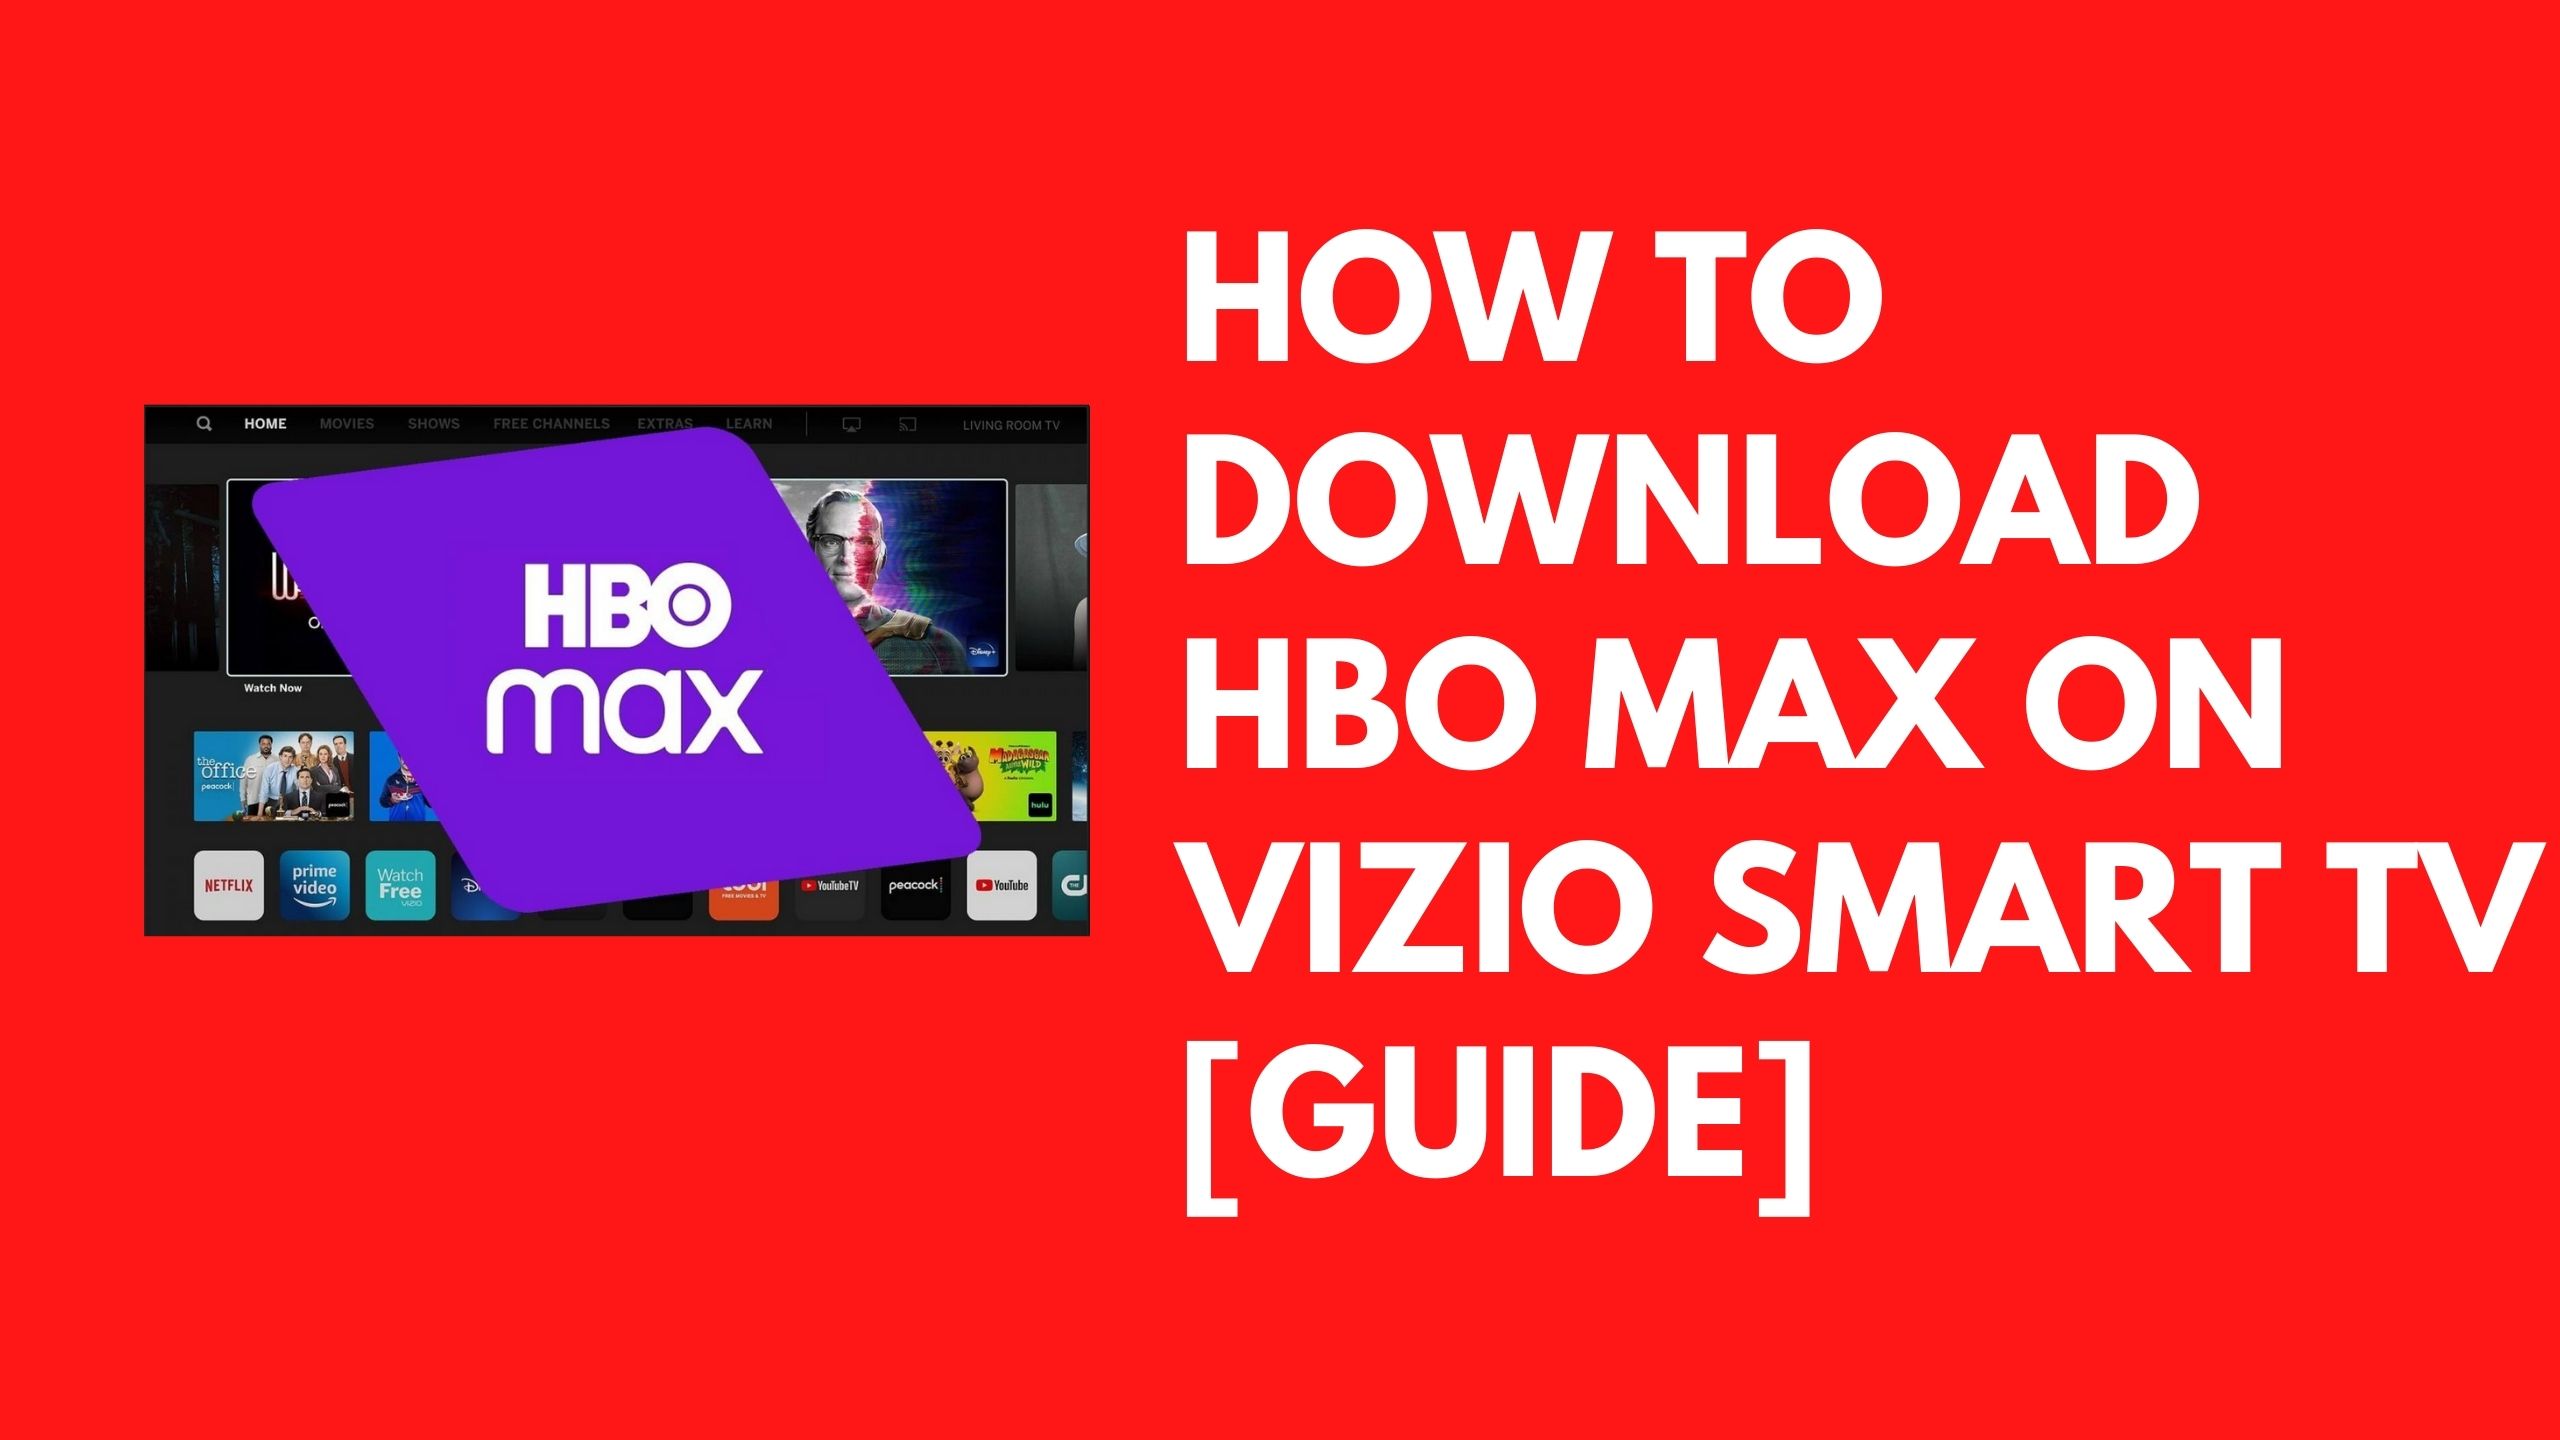 How to Download HBO Max on Vizio Smart TV